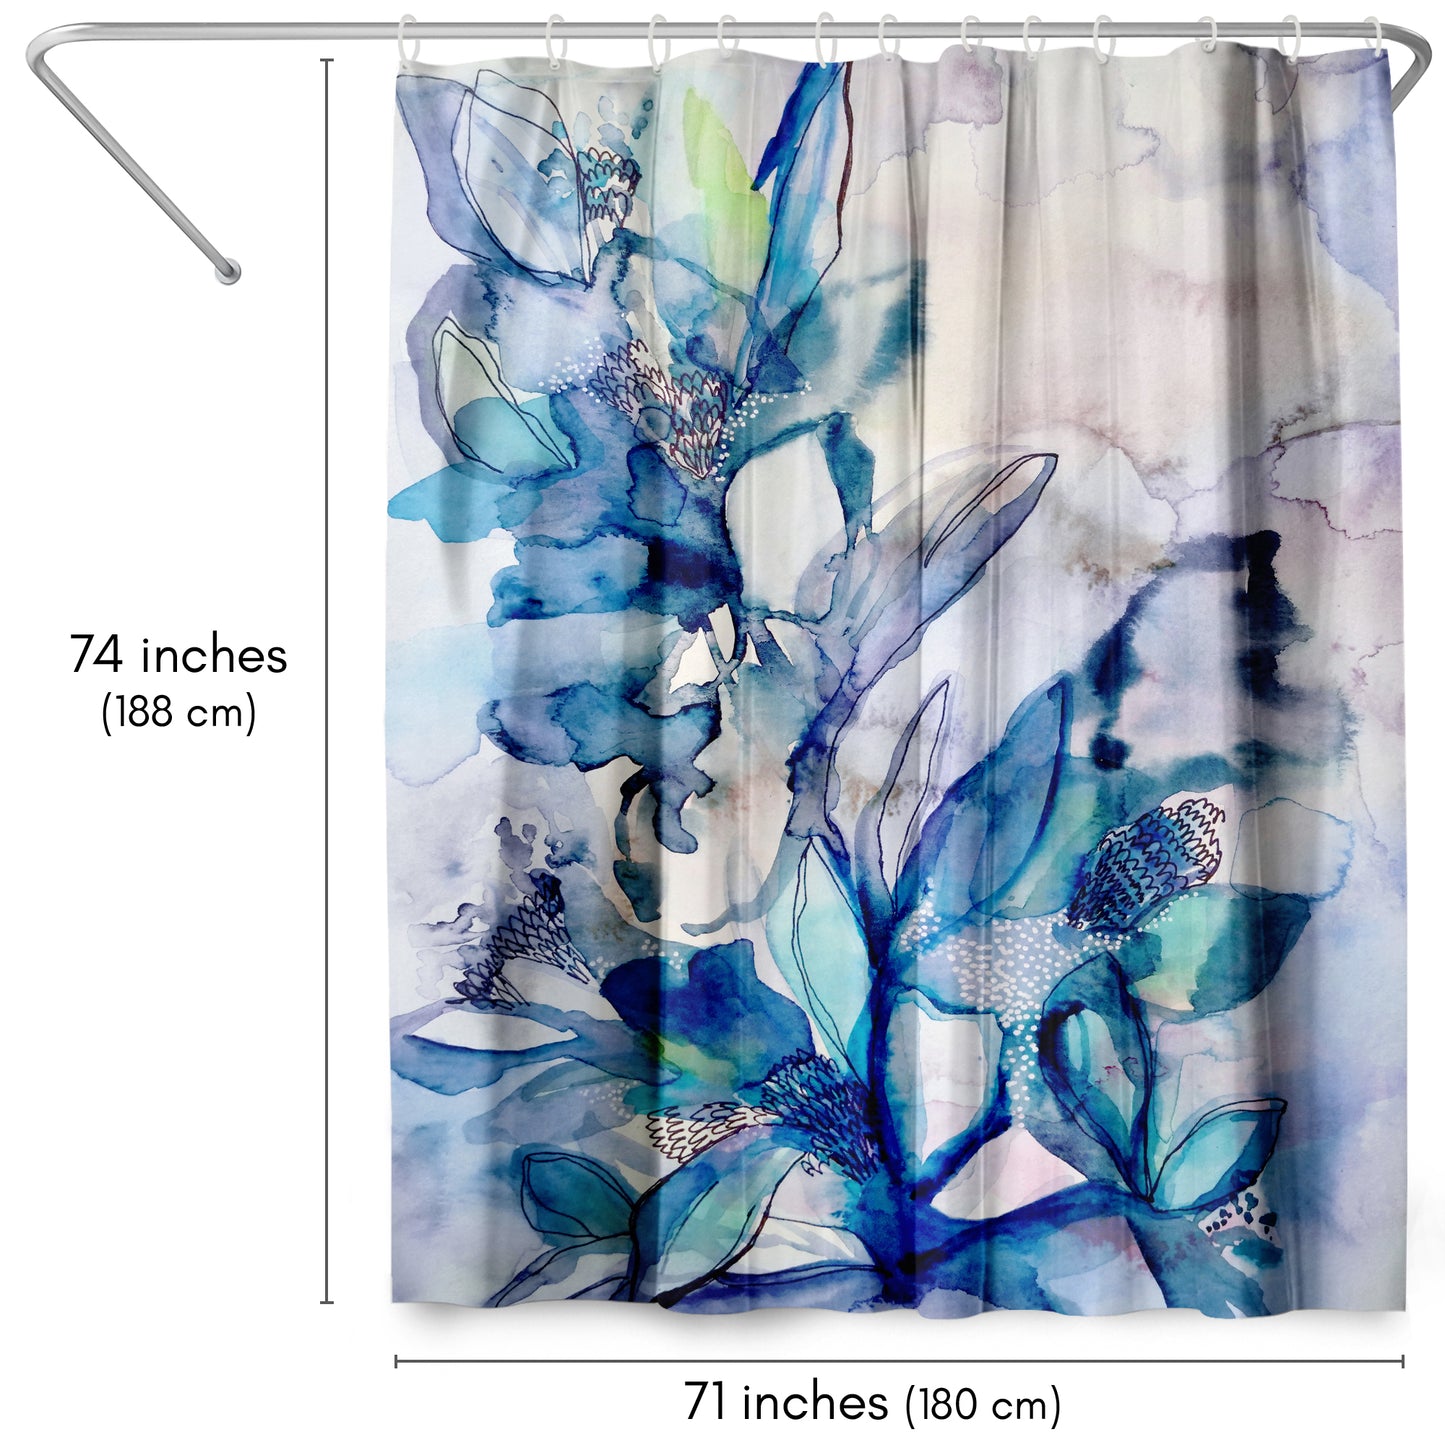 71" x 74" Abstract Shower Curtain with 12 Hooks, Aqua Floral by Hope Bainbridge